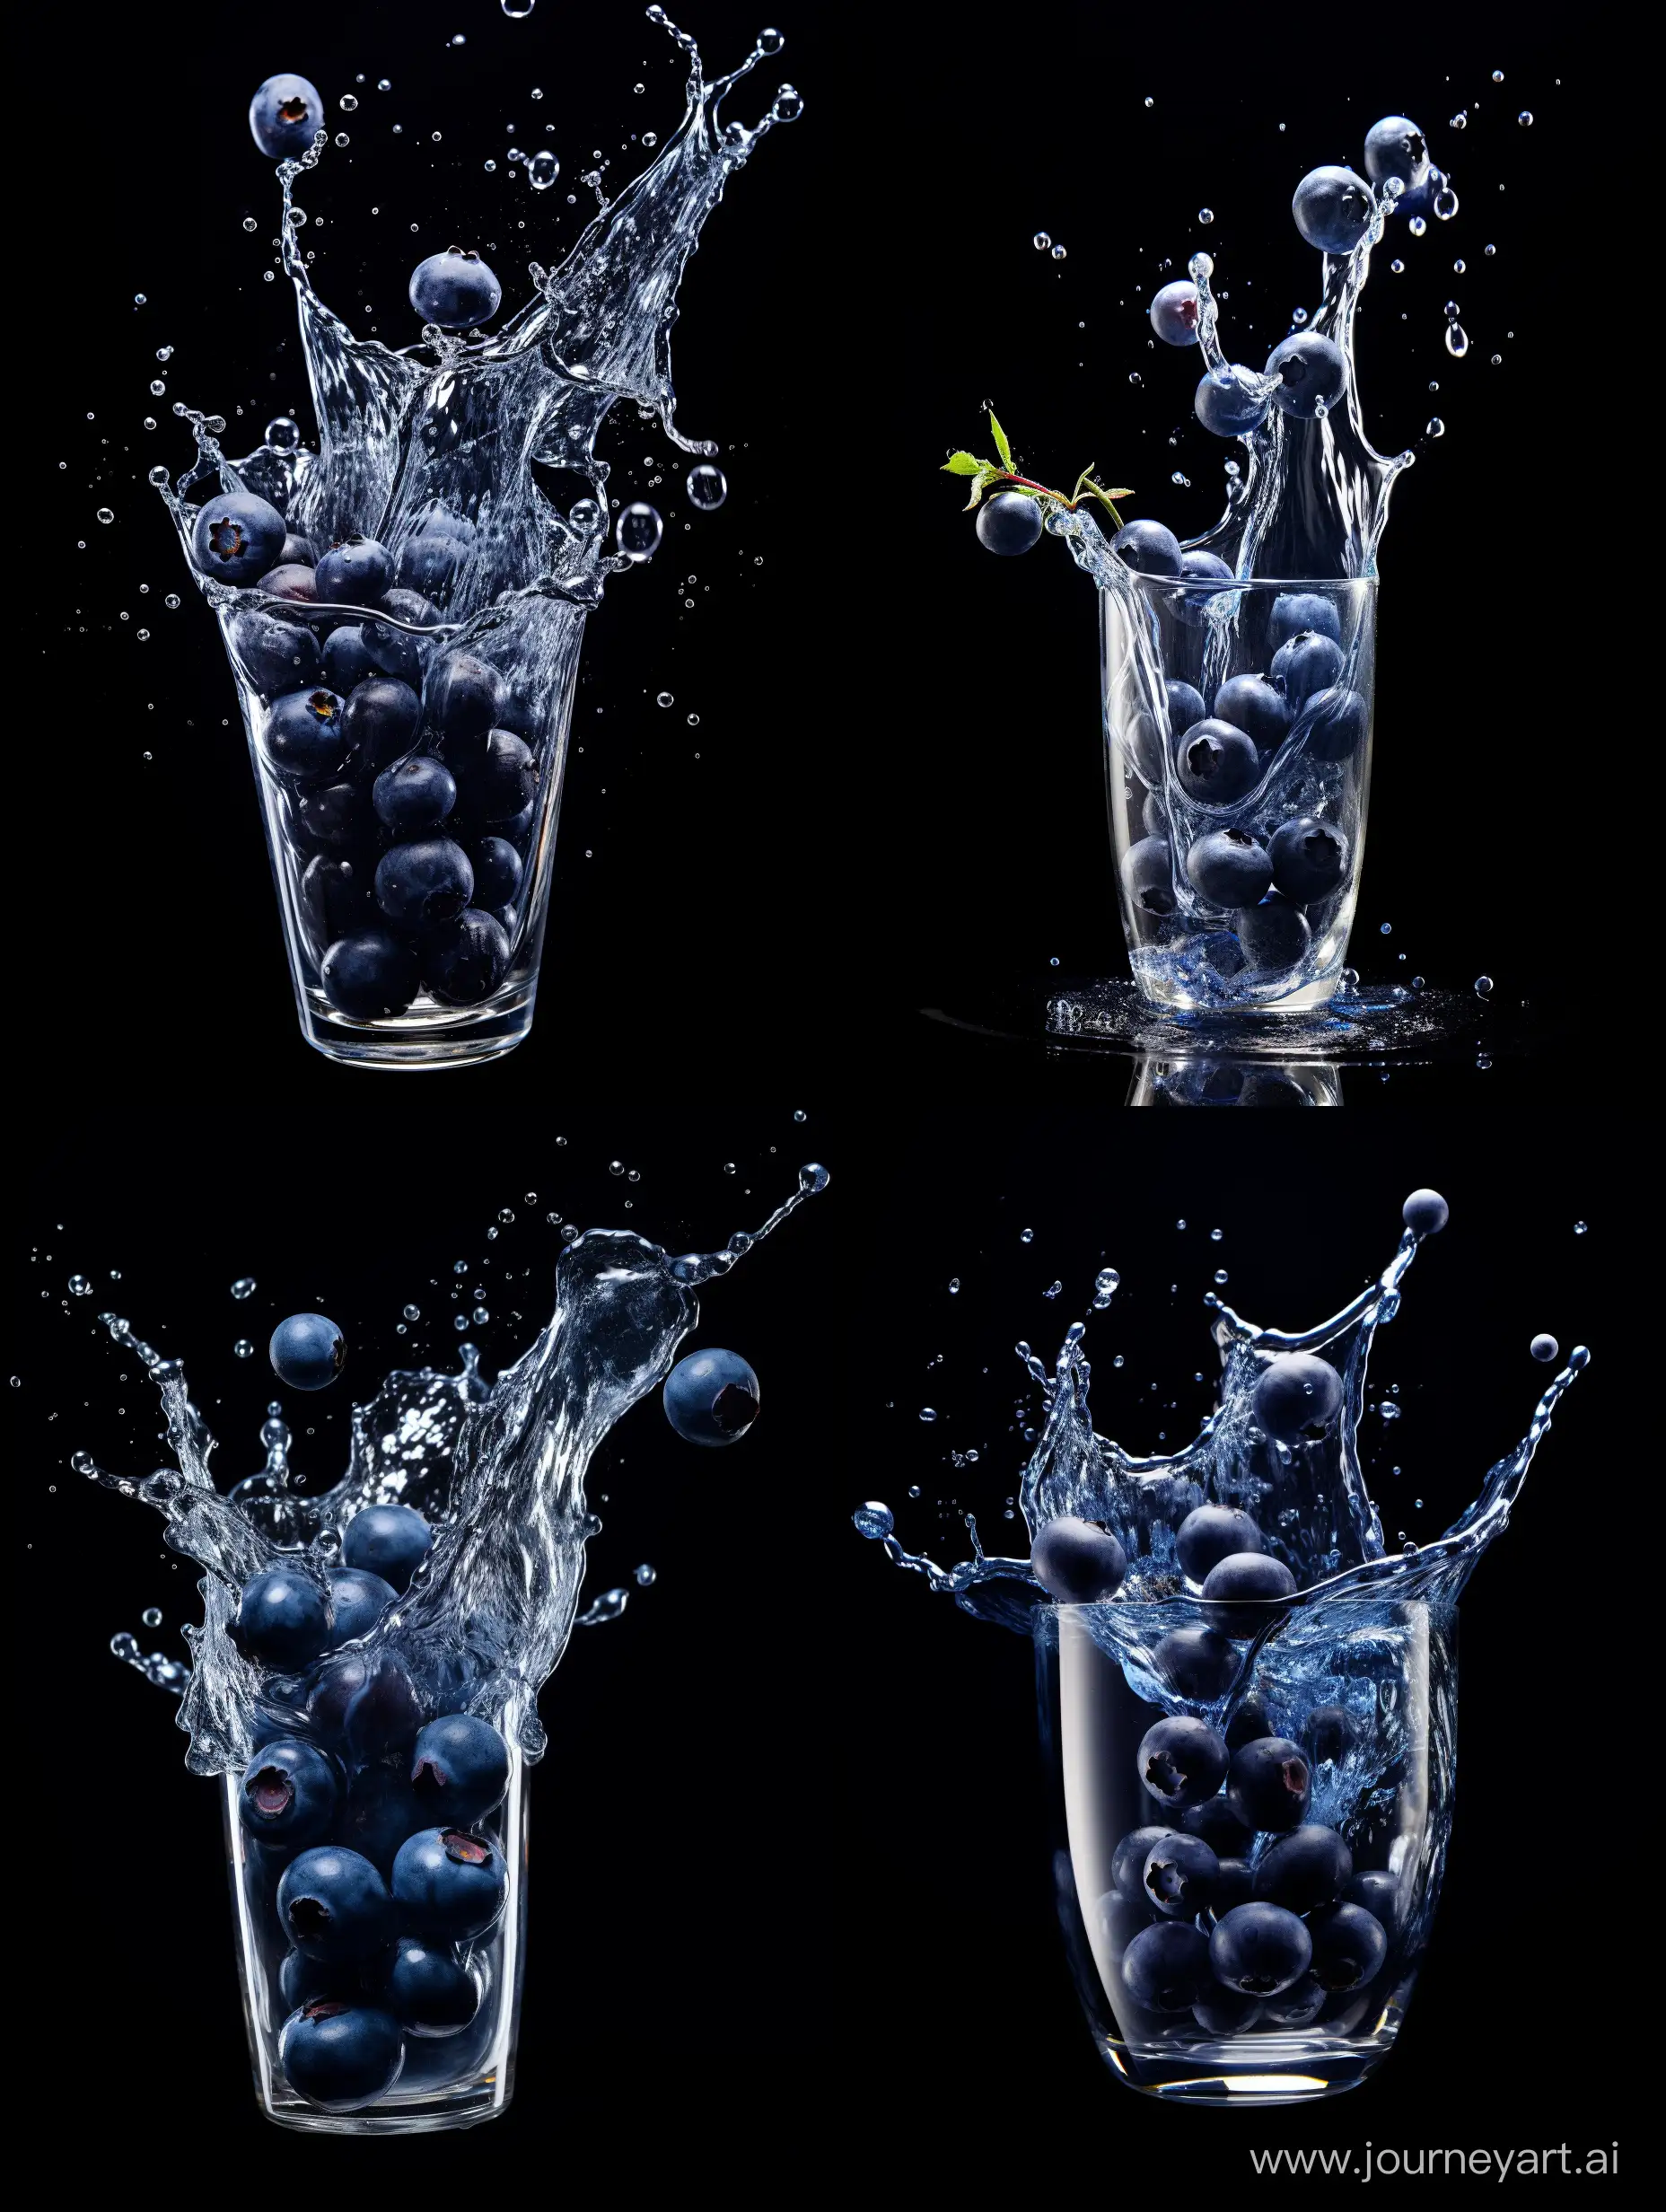 Captivating-Blueberries-Dive-into-Crystal-Clear-Water